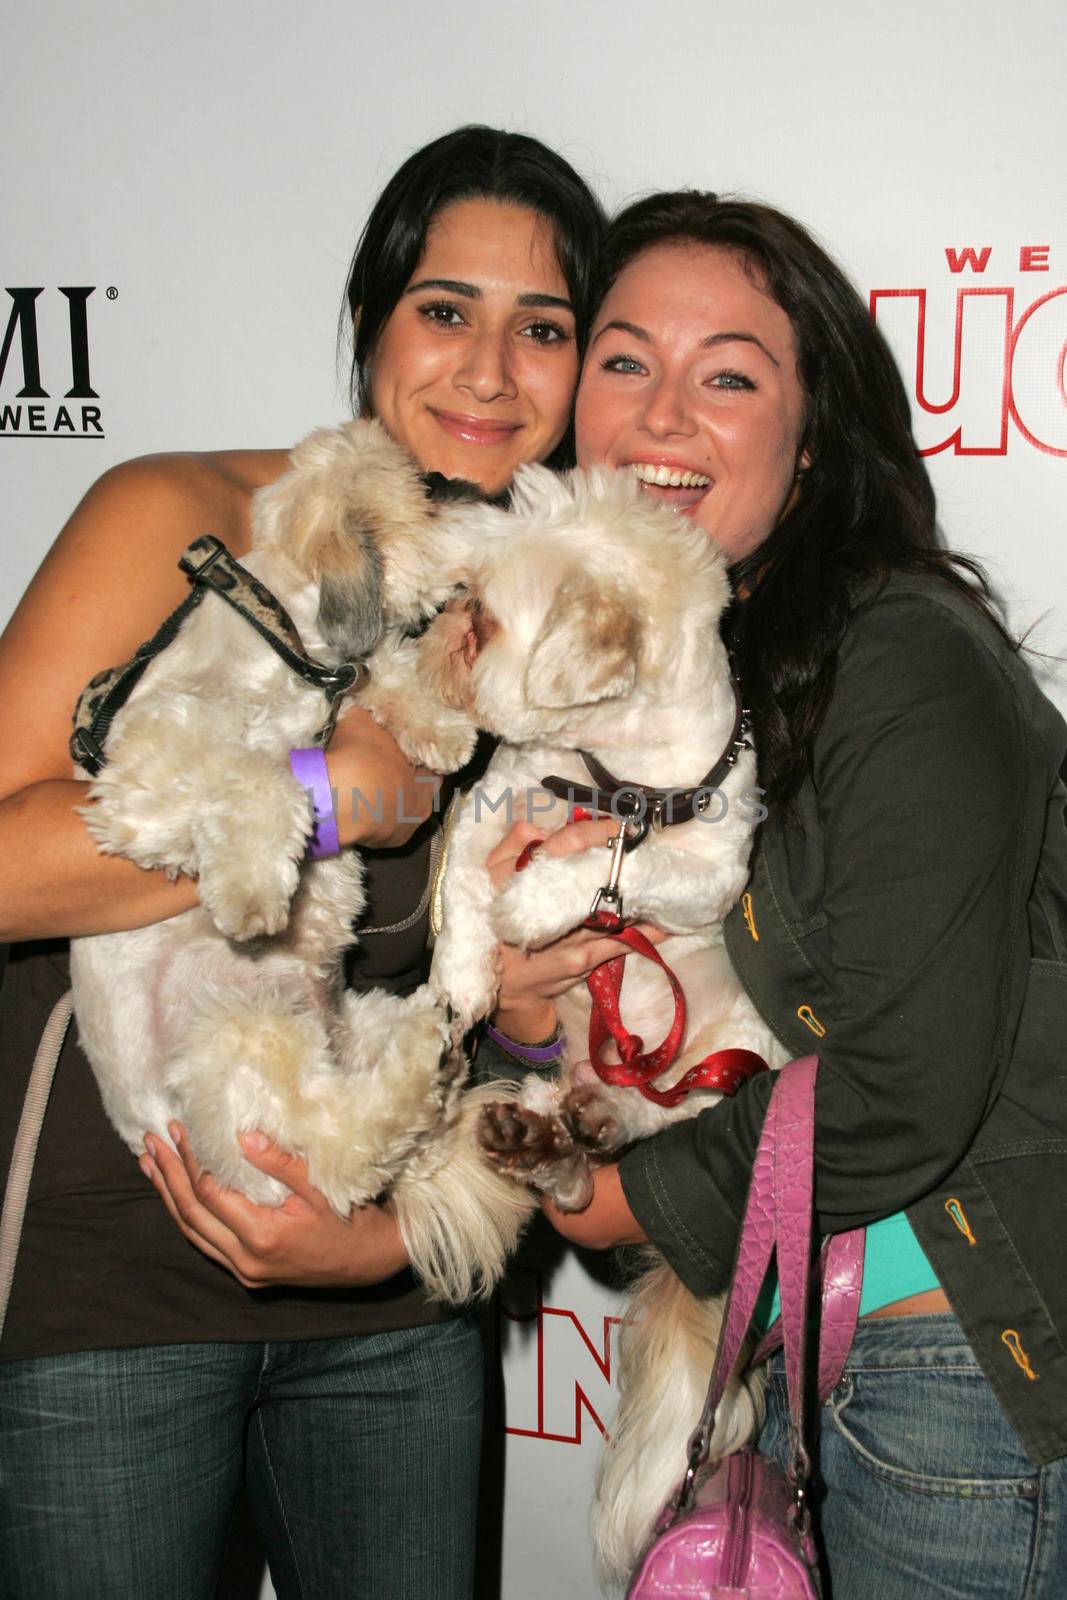 Sasa Jalali and Lindsey Labrum
at the In Touch Presents Pets And Their Stars Party, Cabana Club, Hollywood, CA 09-21-05